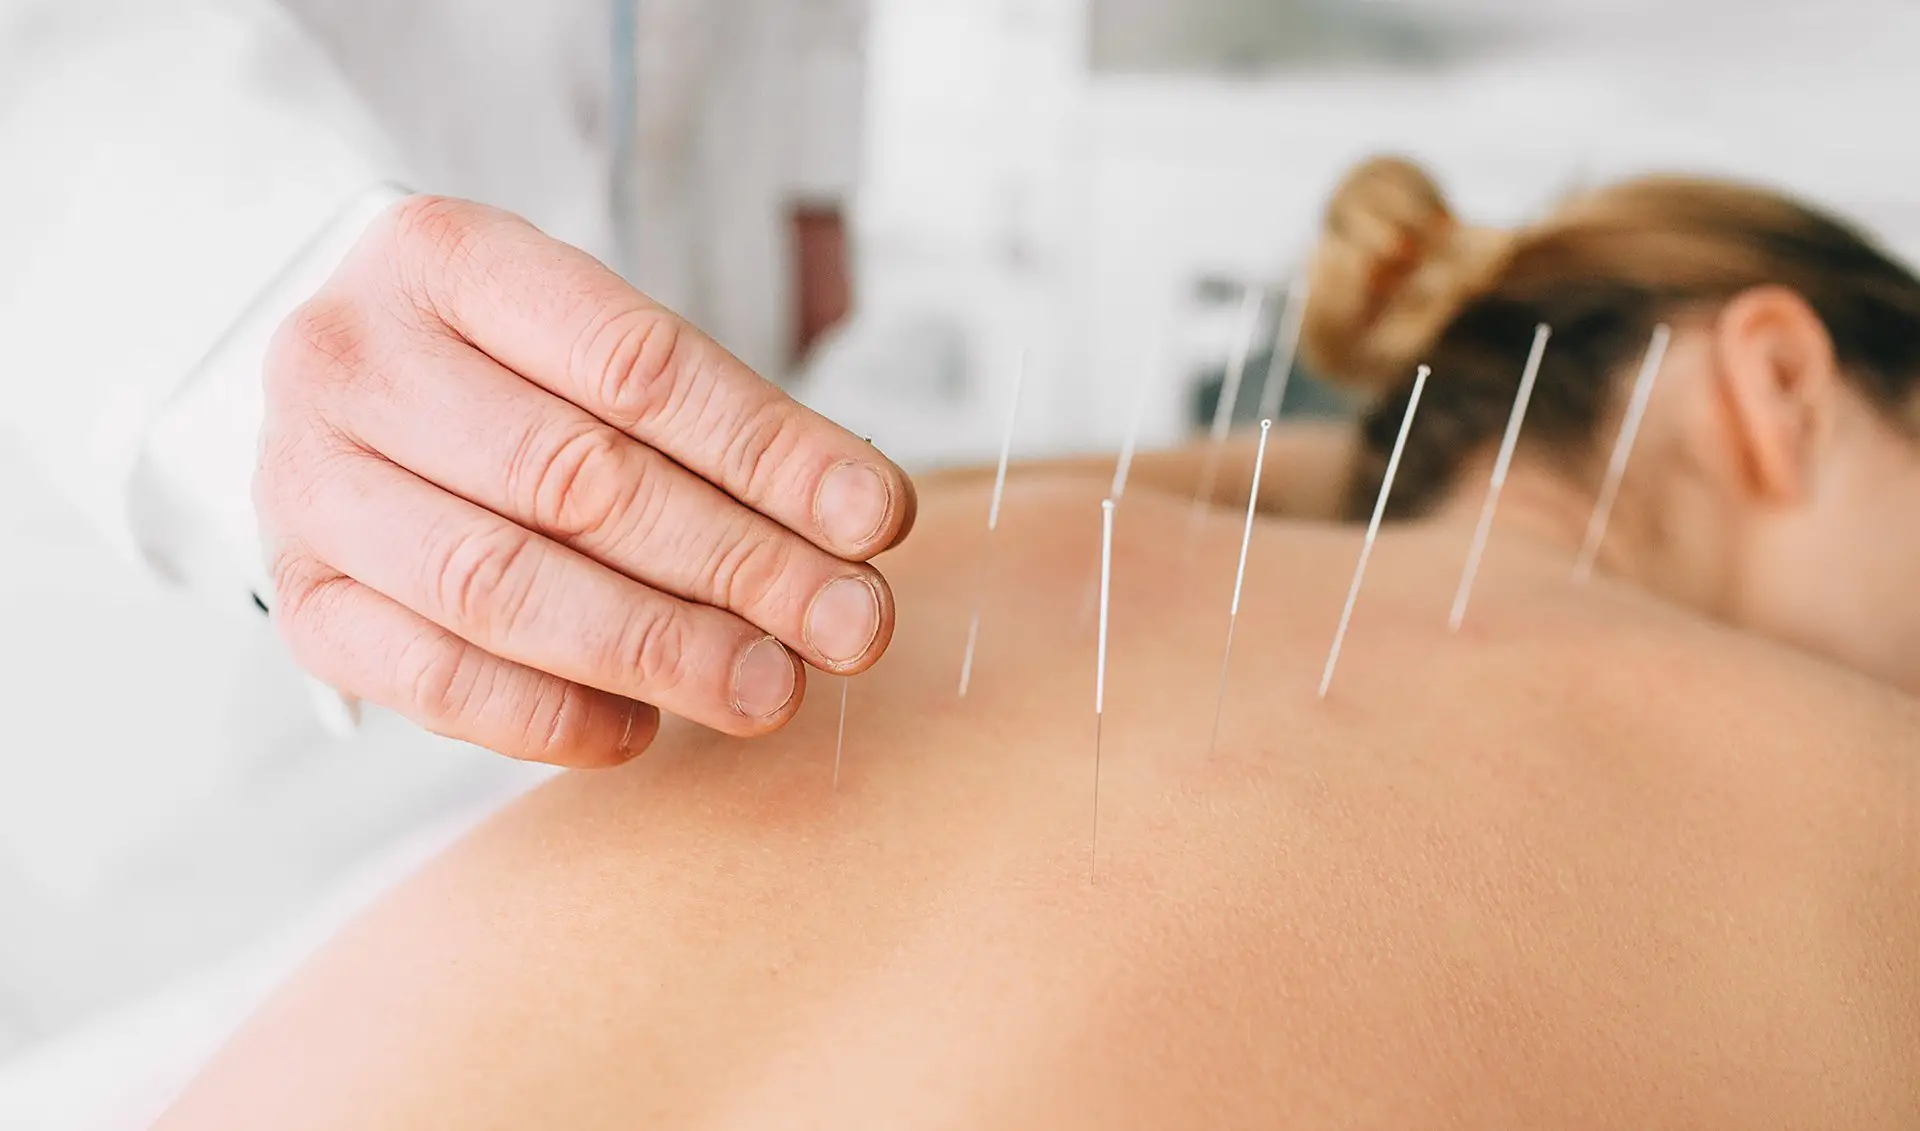 Could Acupunture Ease Your Back And Joint Pains?